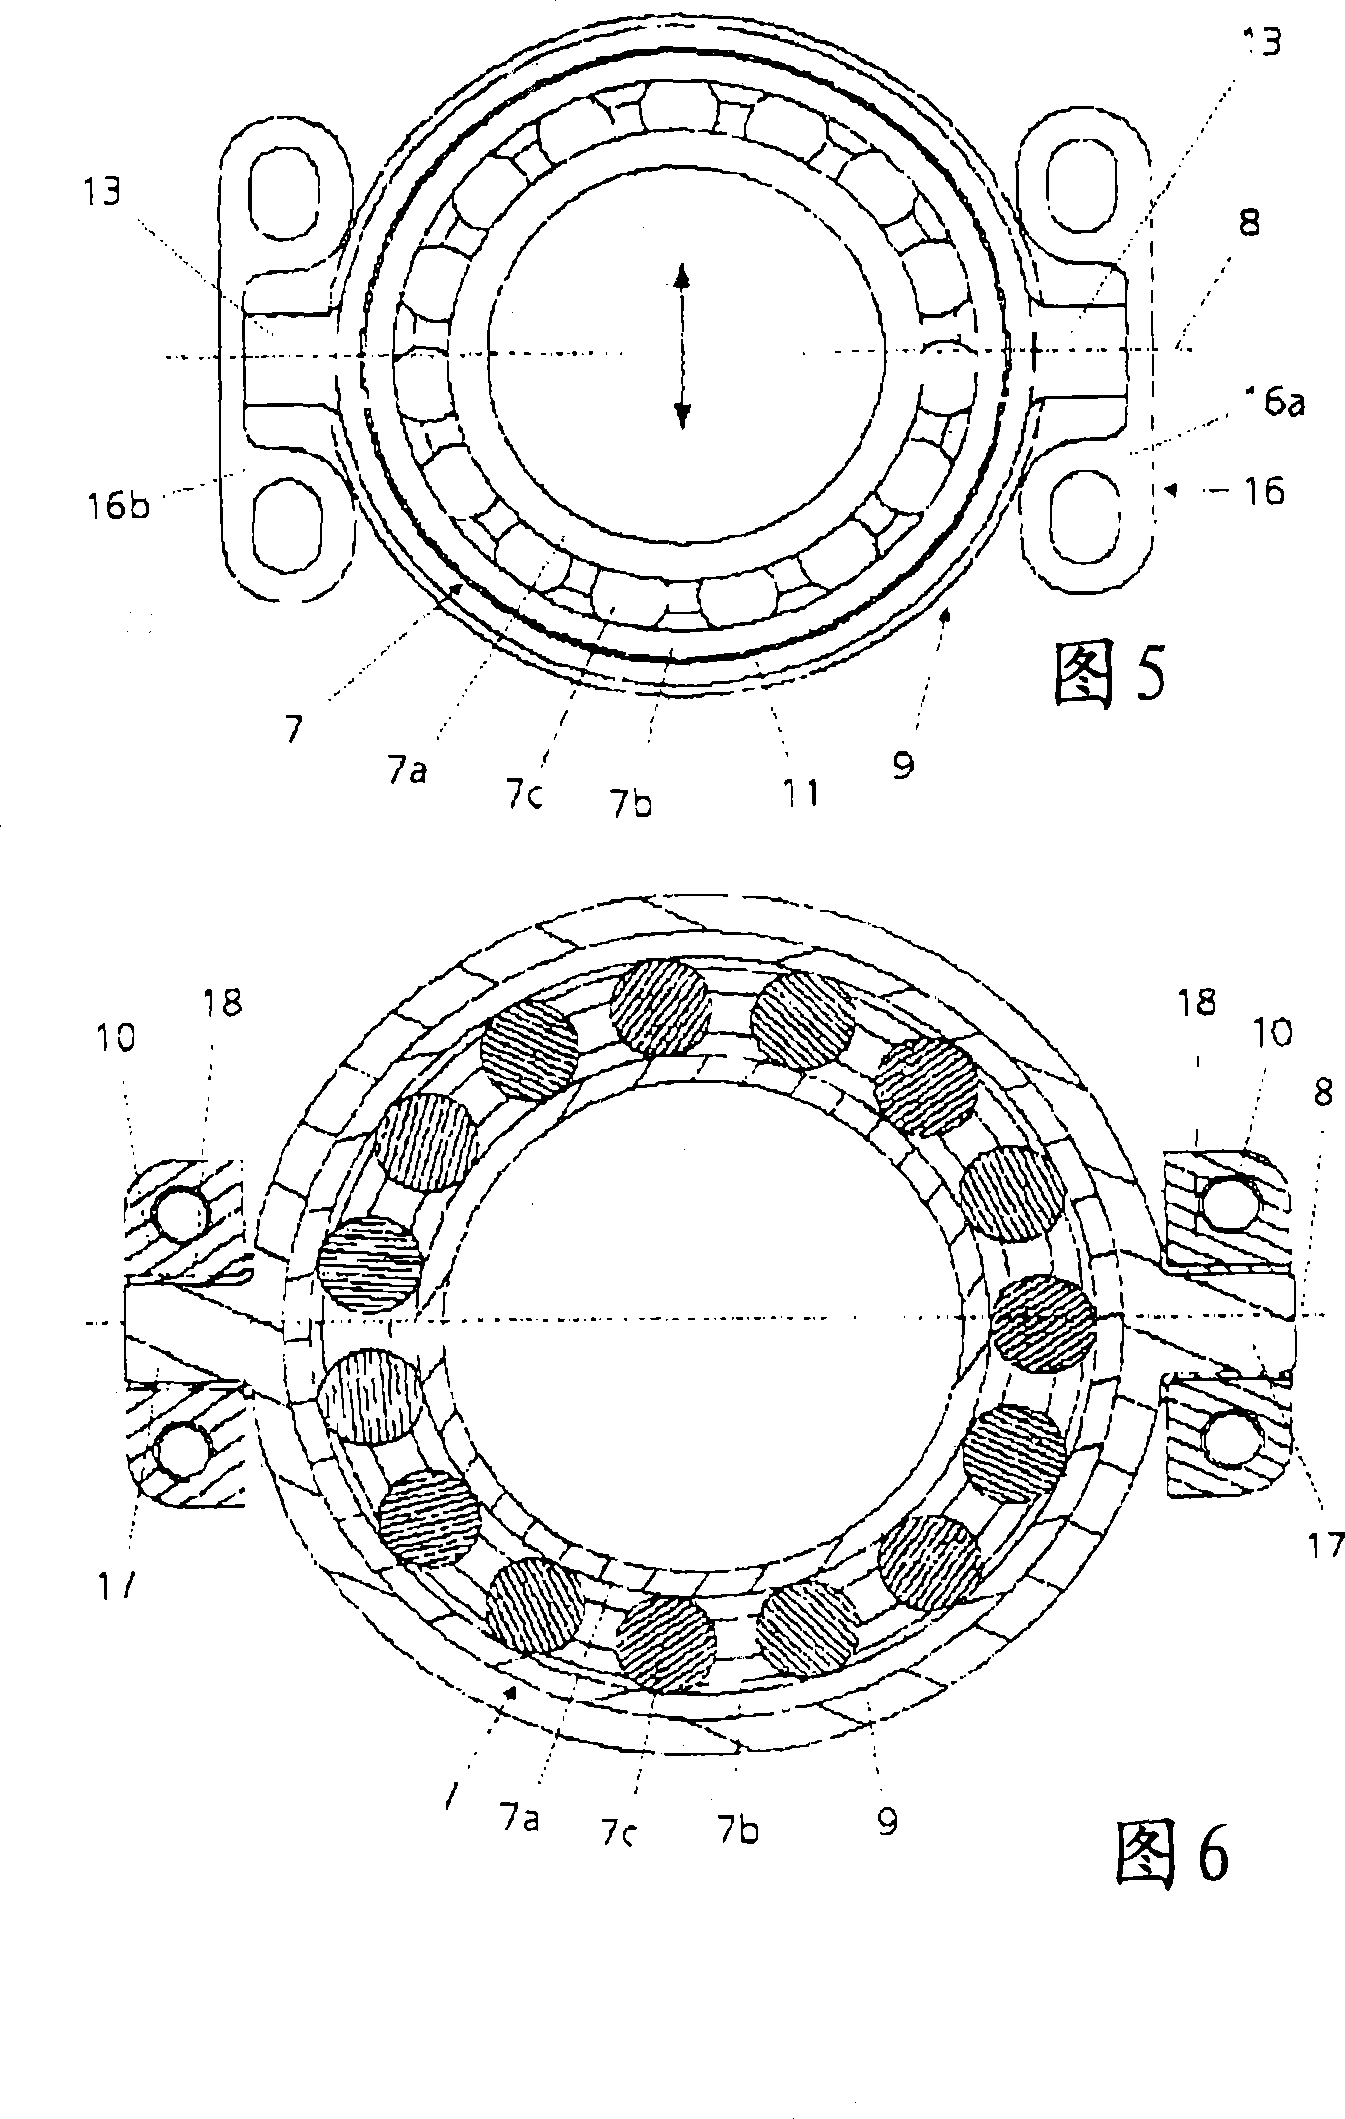 Power steering with an elastically mounted recirculating ball spindle gear